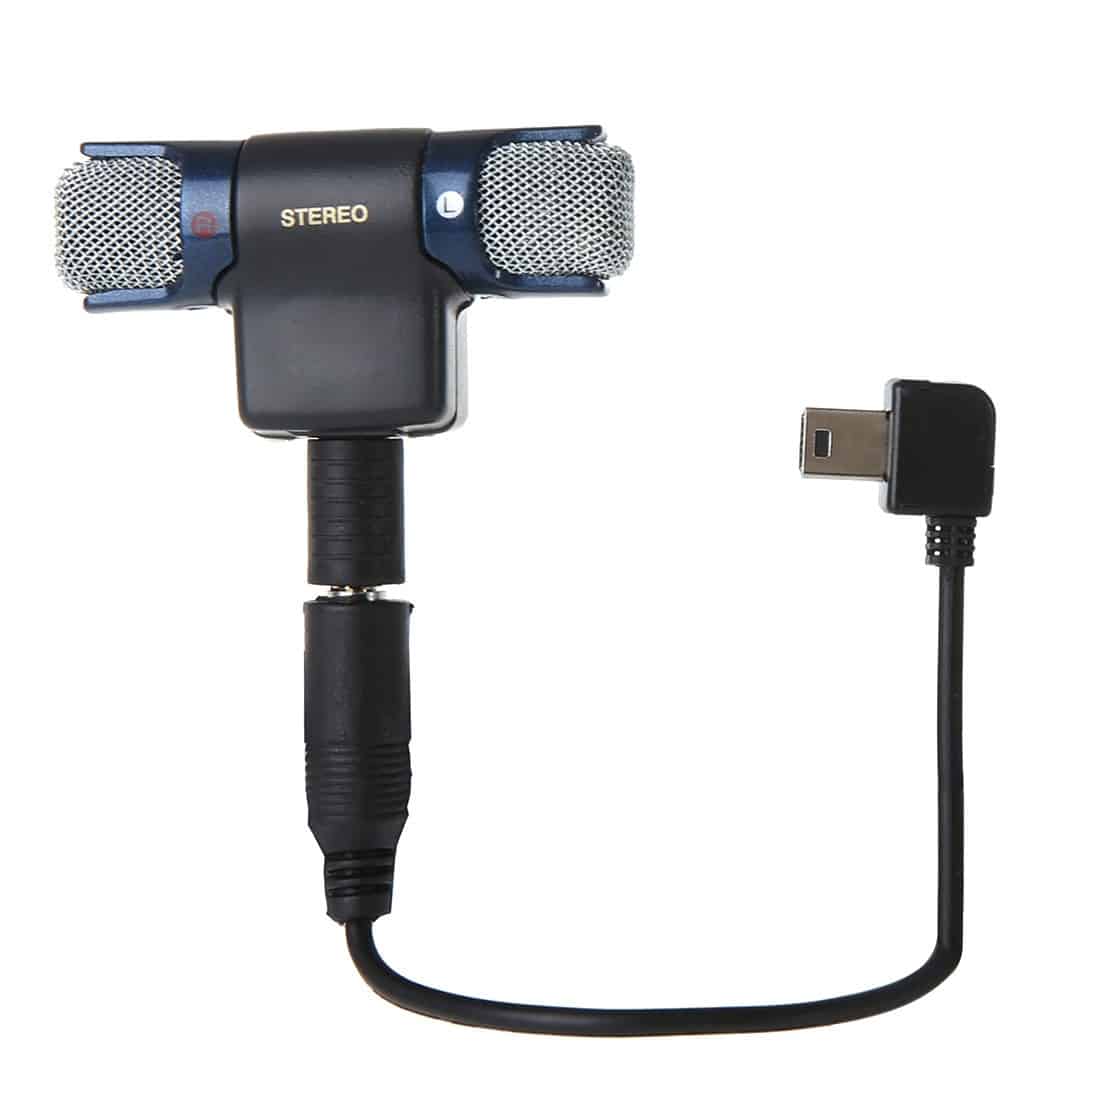 External Mini Stereo MIC Microphone with 17CM 3.5mm to Mini USB